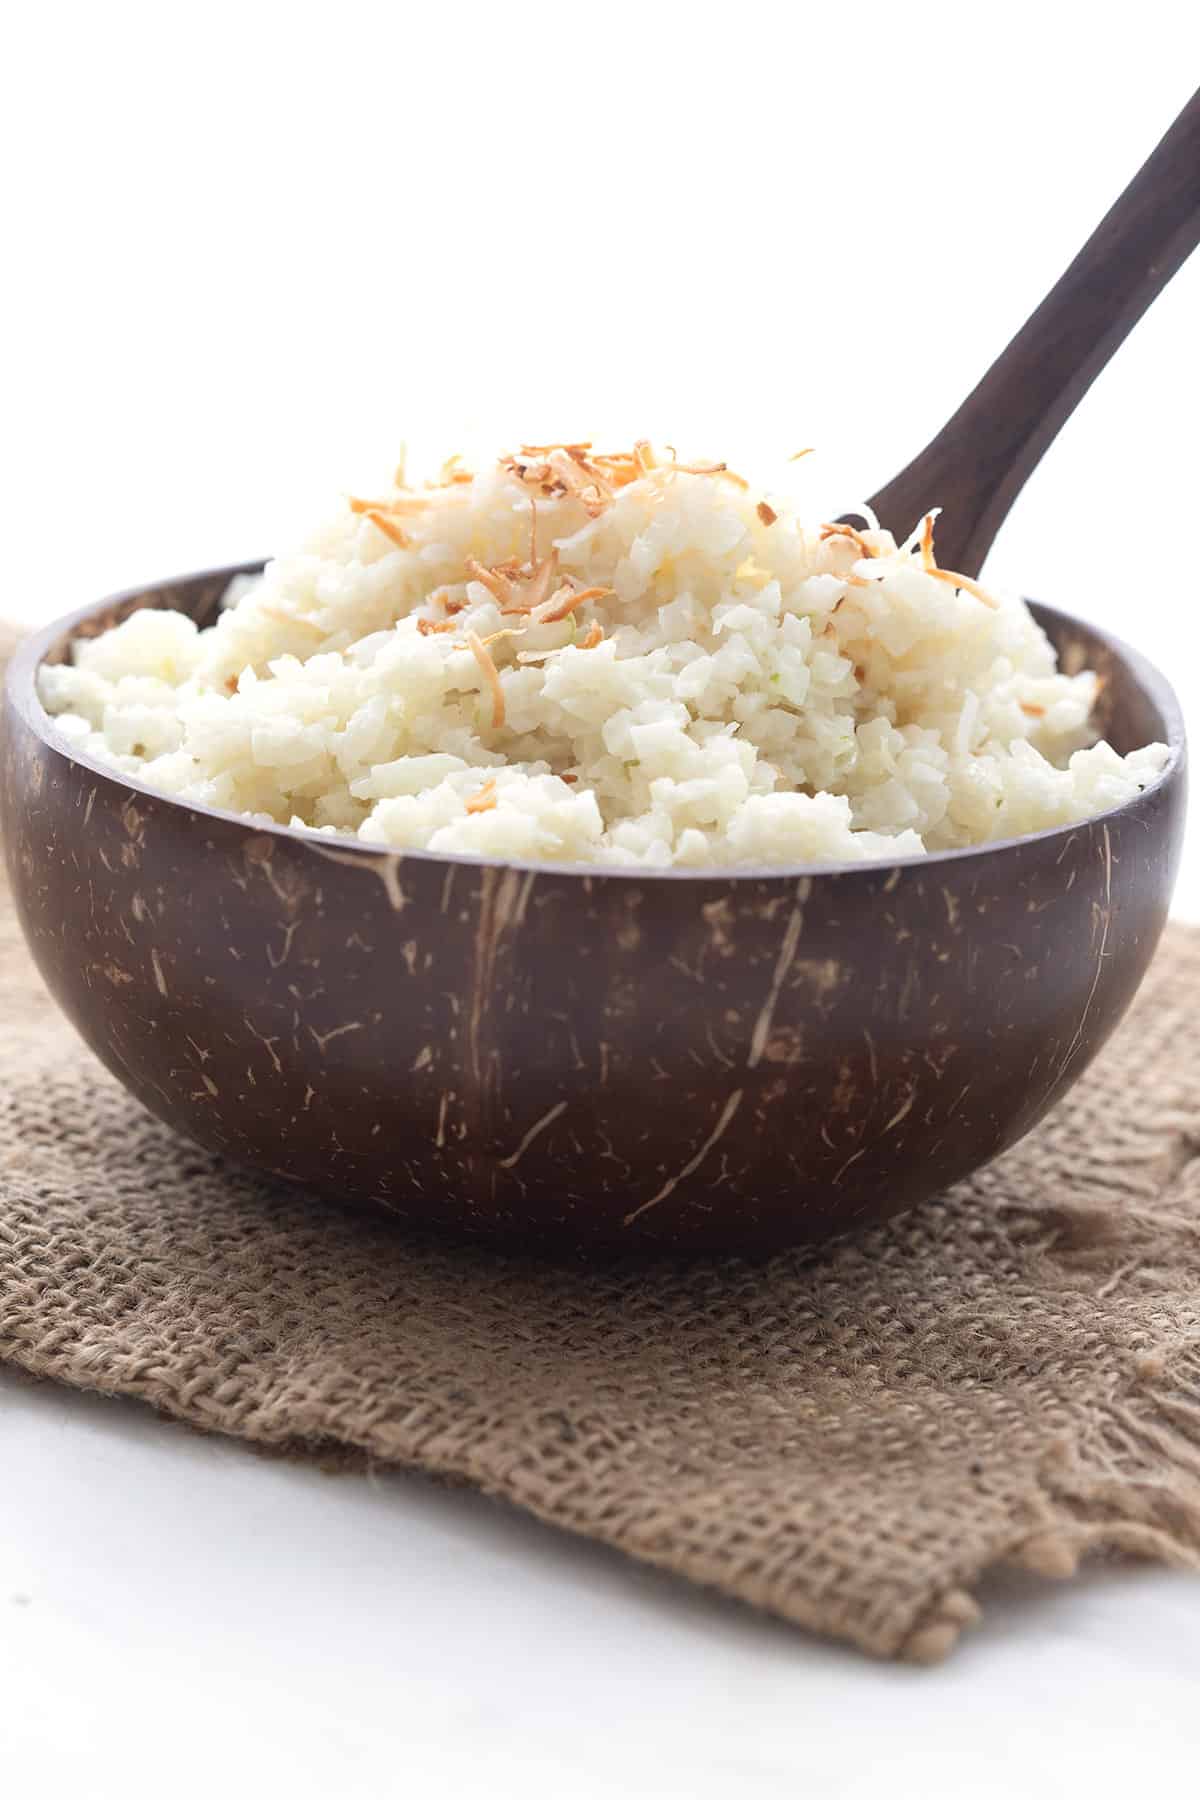 A brown wooden bowl filled with coconut cauliflower rice over a burlap napkin.